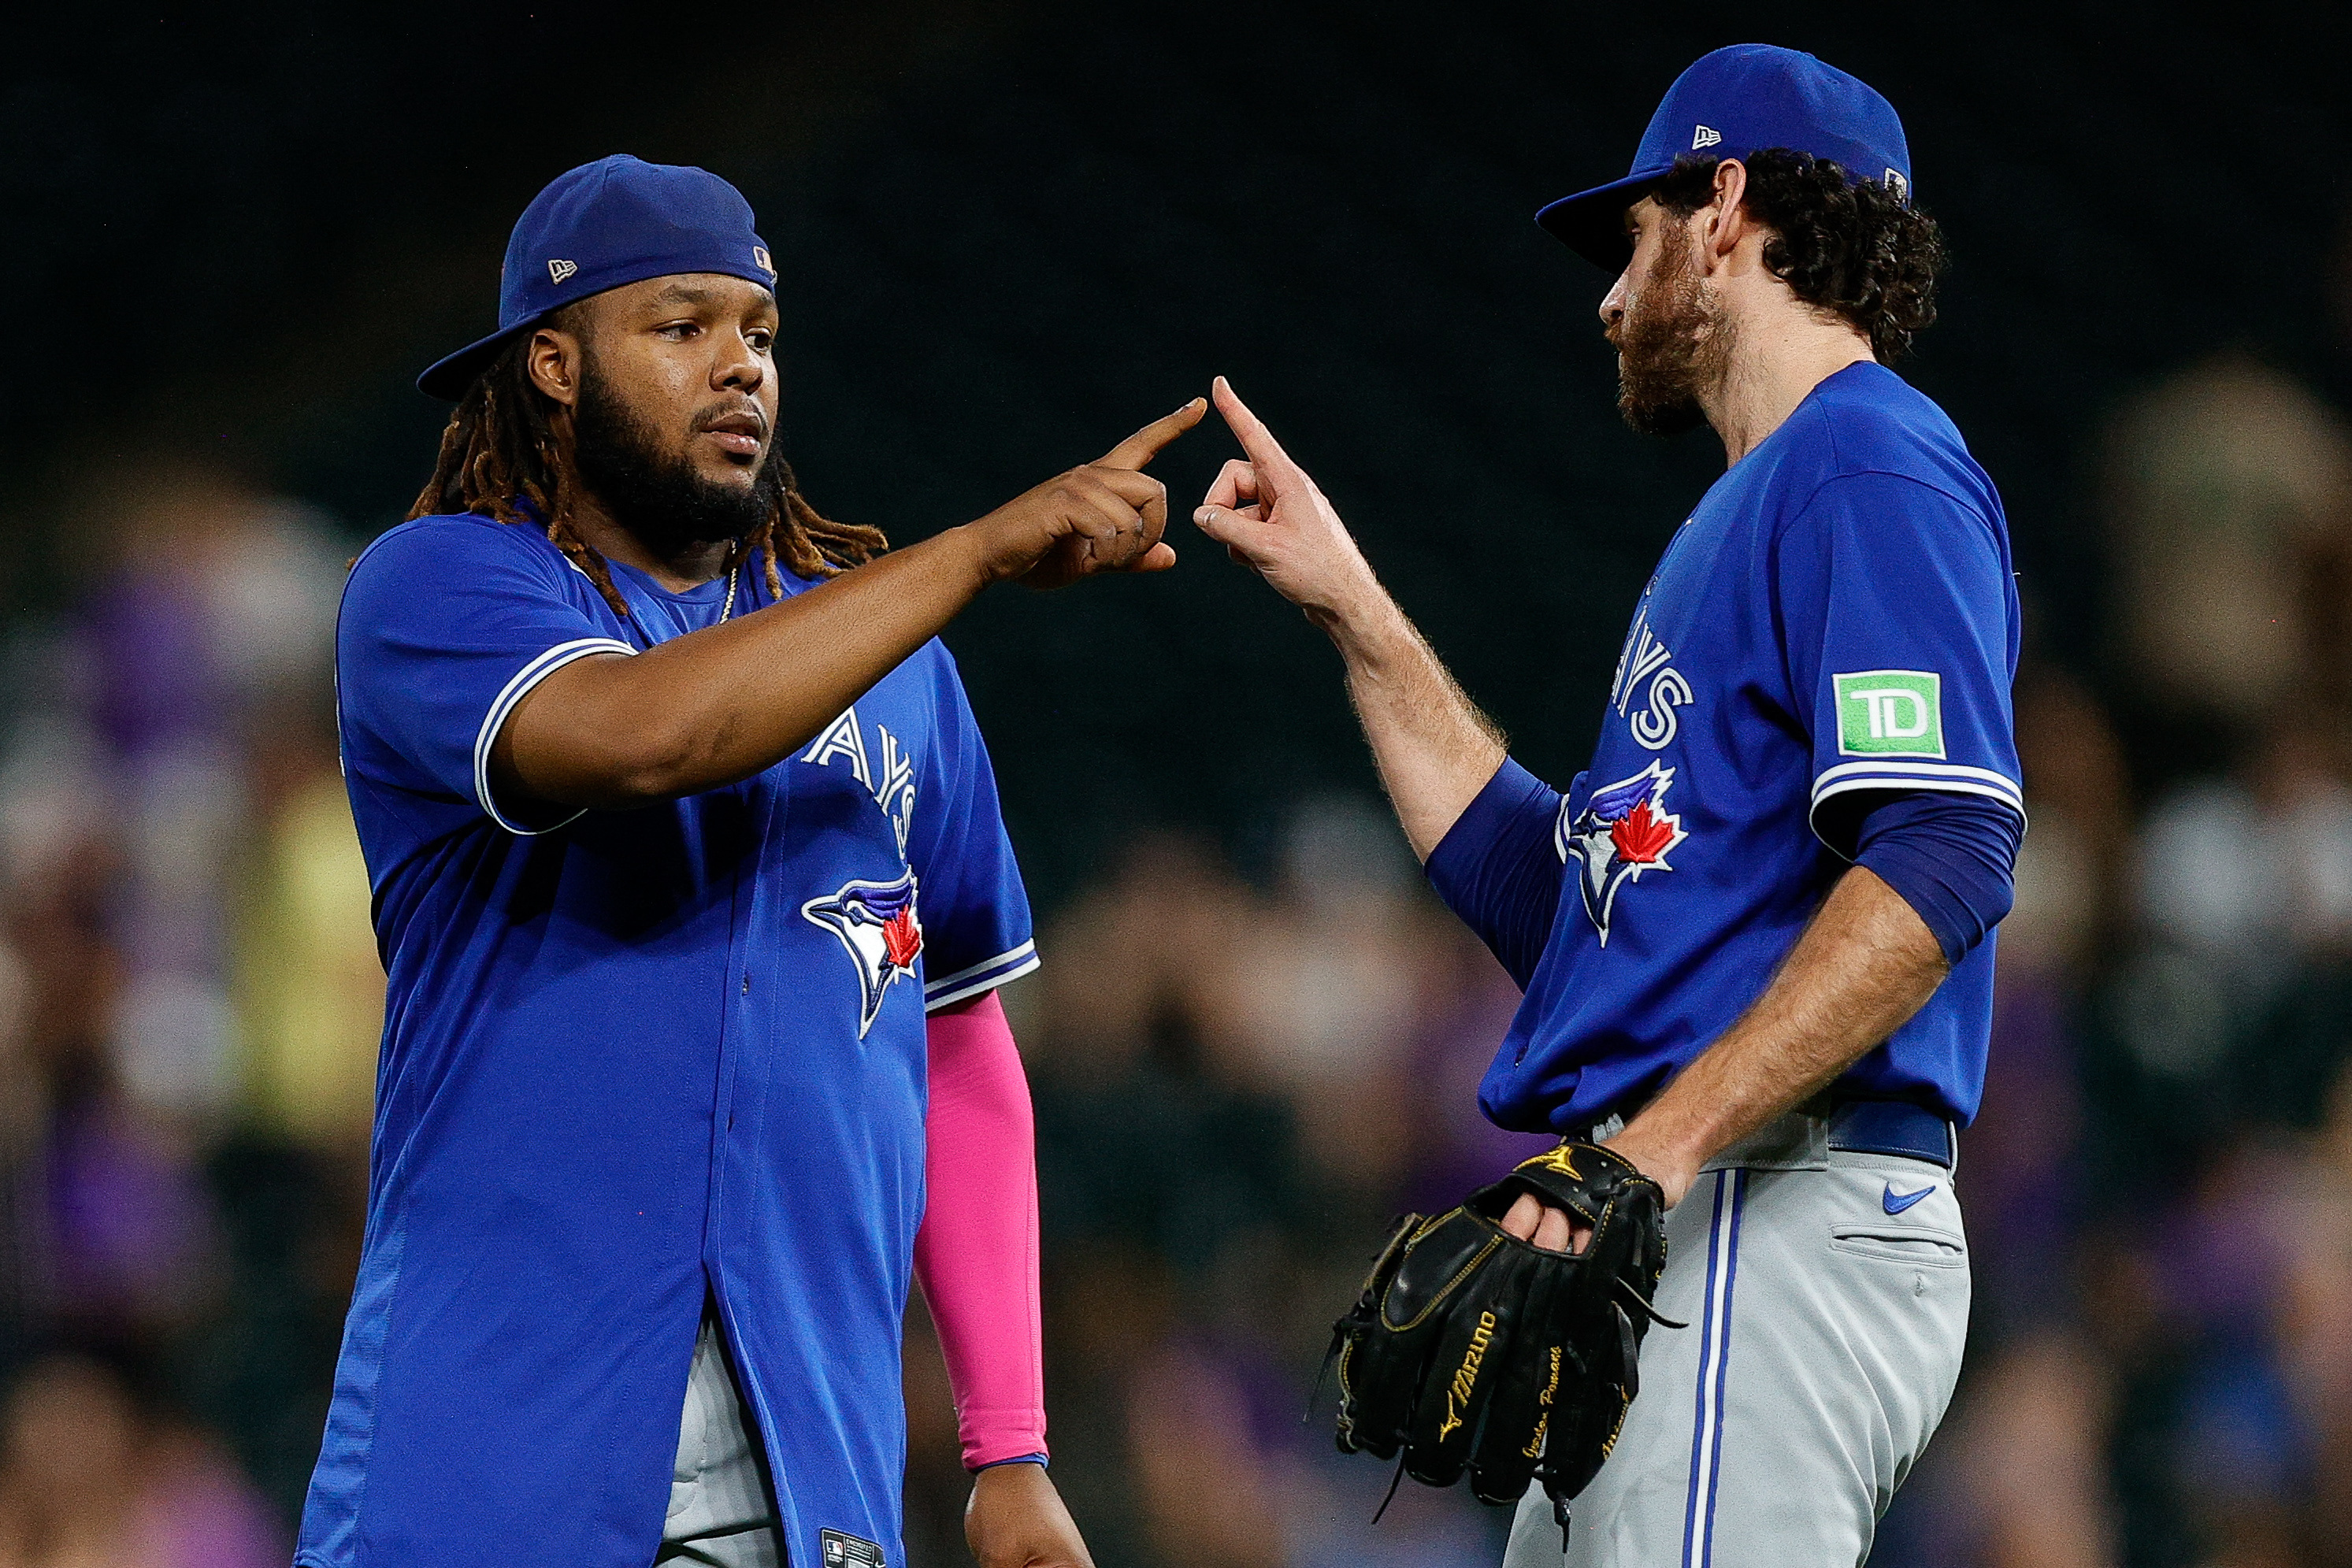 Blue Jays Reliever Jordan Romano exited tonight's All-Star Game